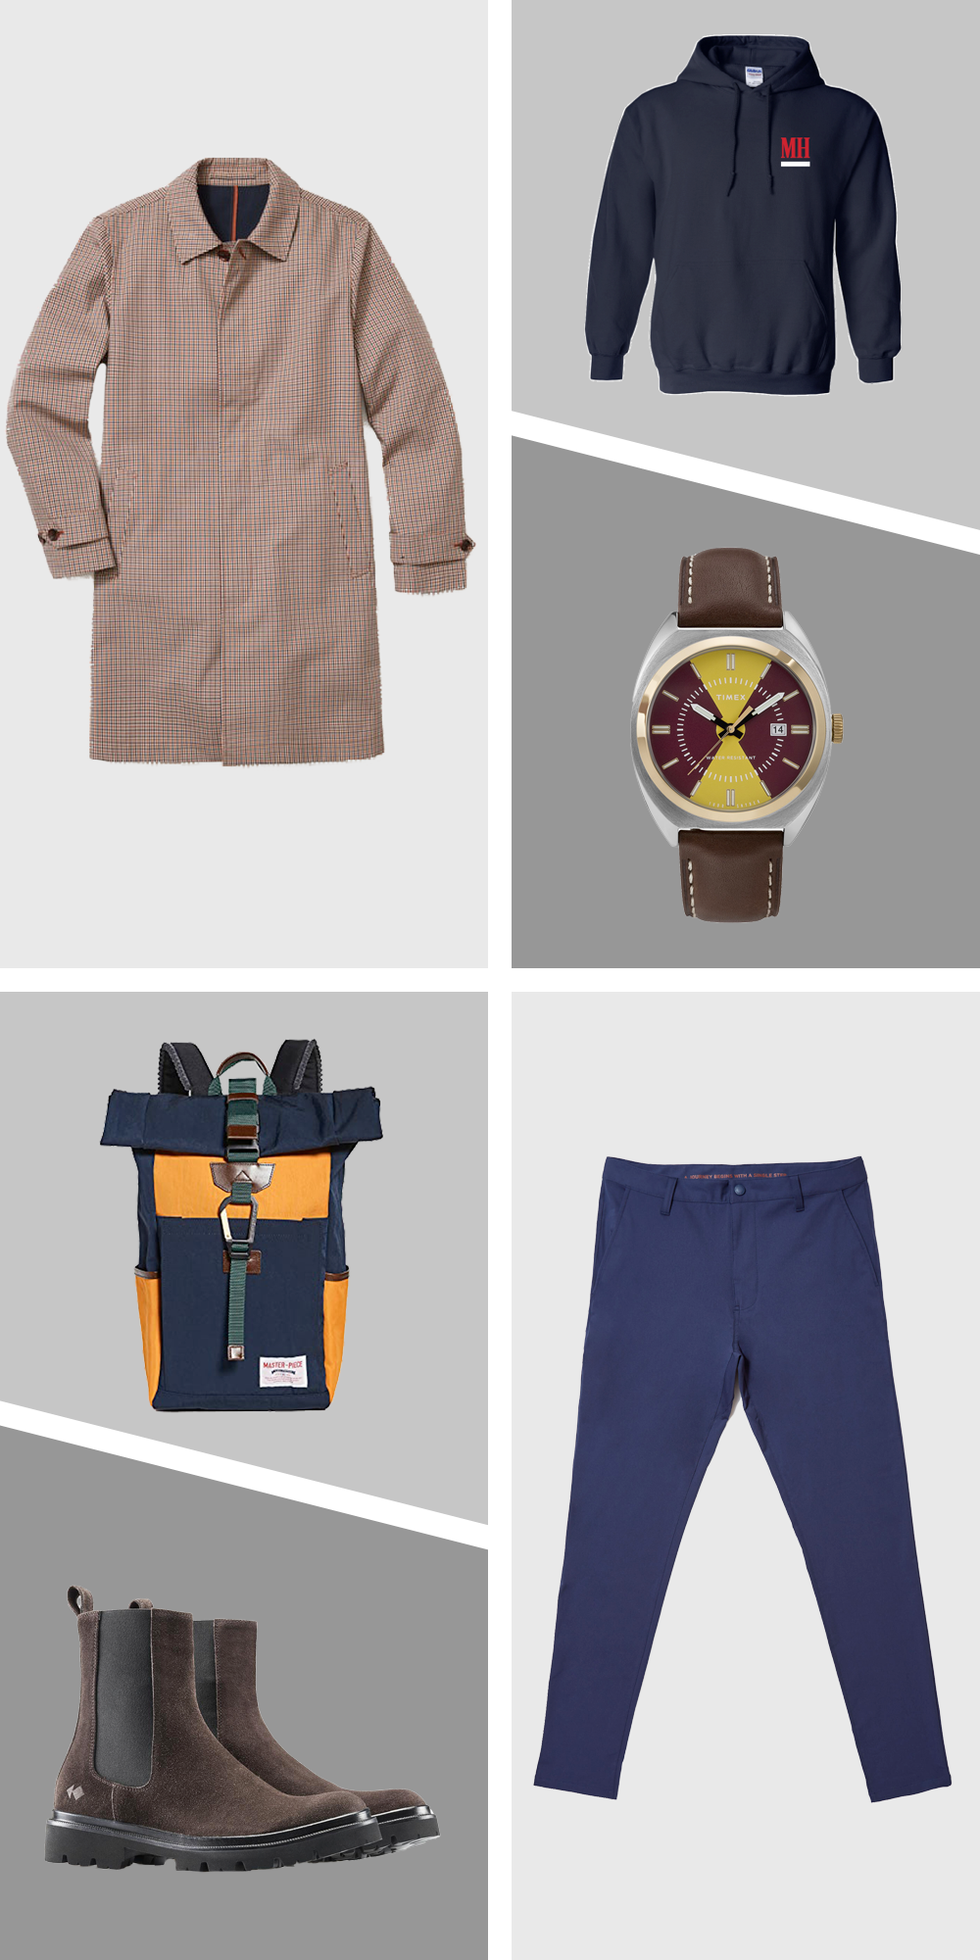 This Summer to Fall Transitional Outfit for Men Is Great for Any